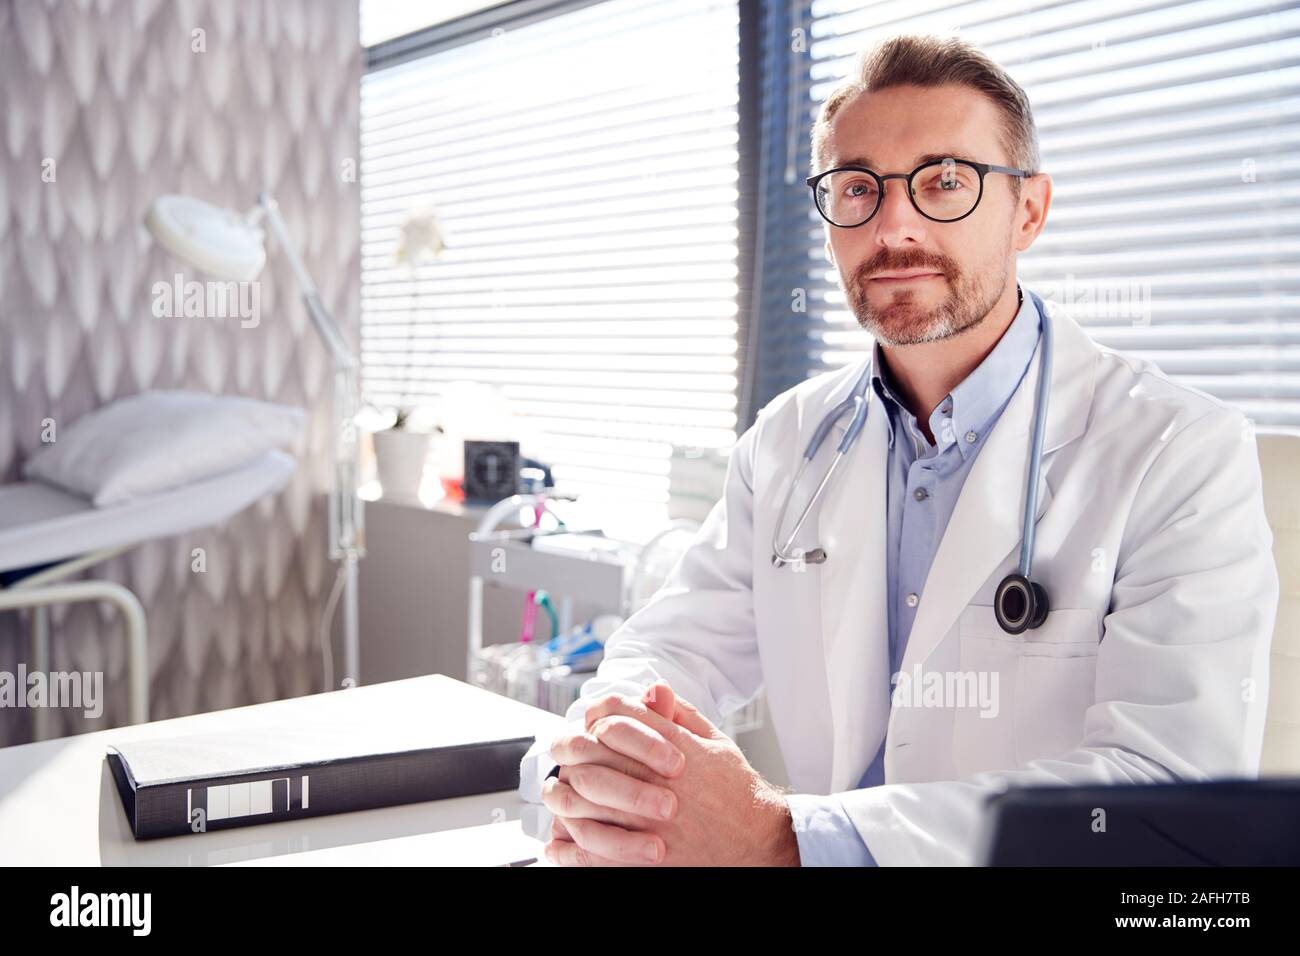 Portrait Of Smiling Male Doctor Wearing White Coat With Stethoscope Sitting Behind Desk In Office Stock Photo